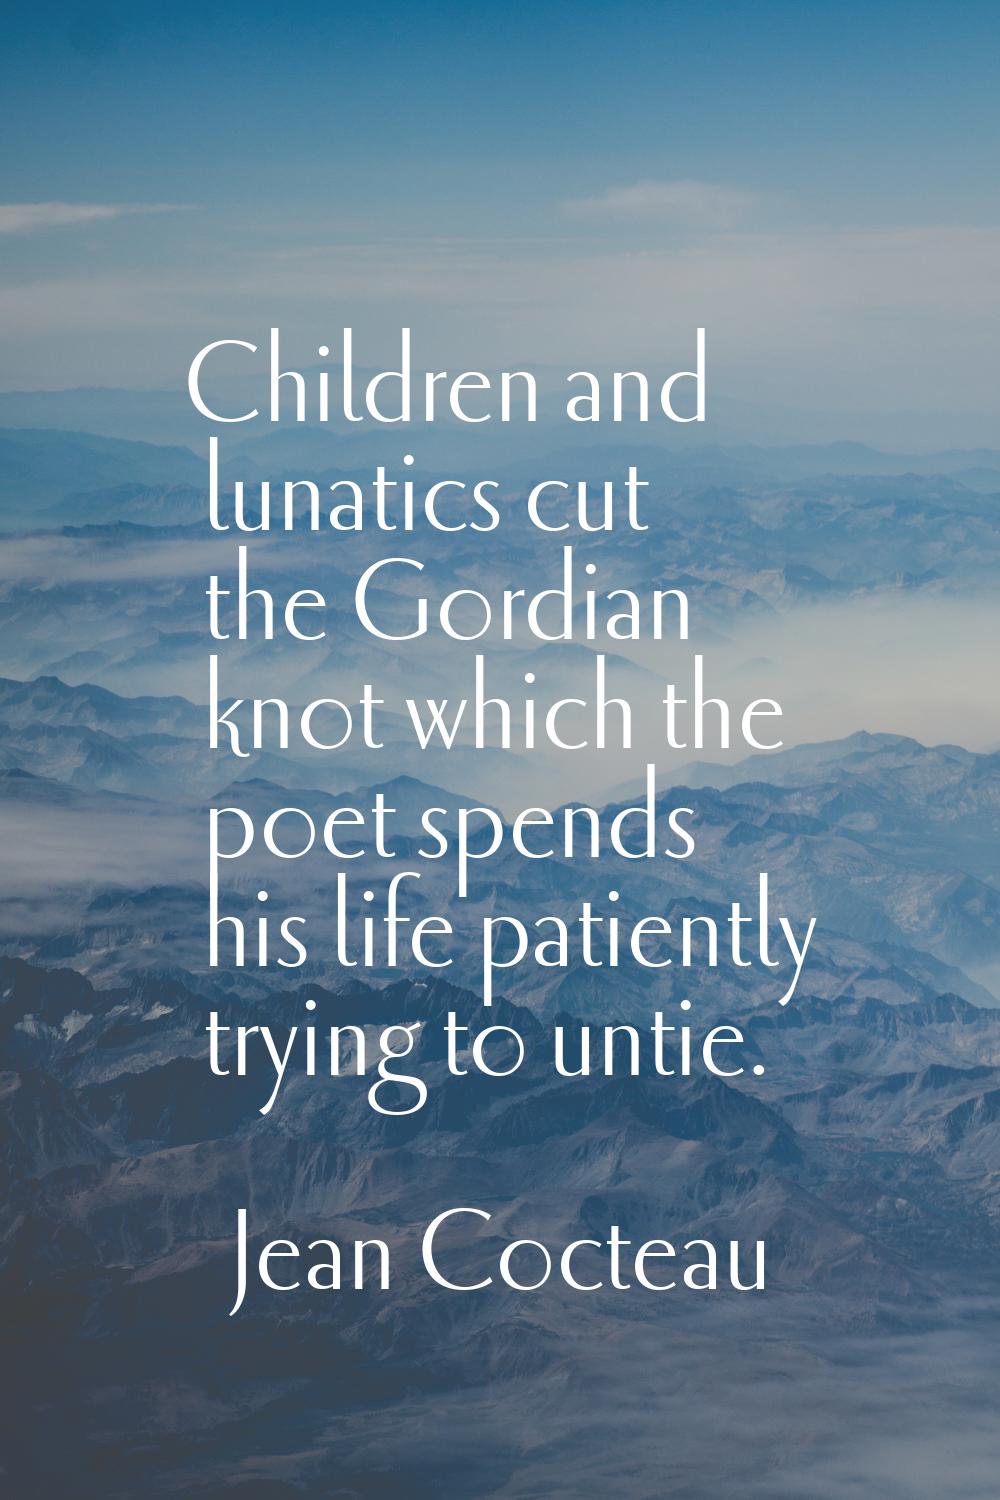 Children and lunatics cut the Gordian knot which the poet spends his life patiently trying to untie